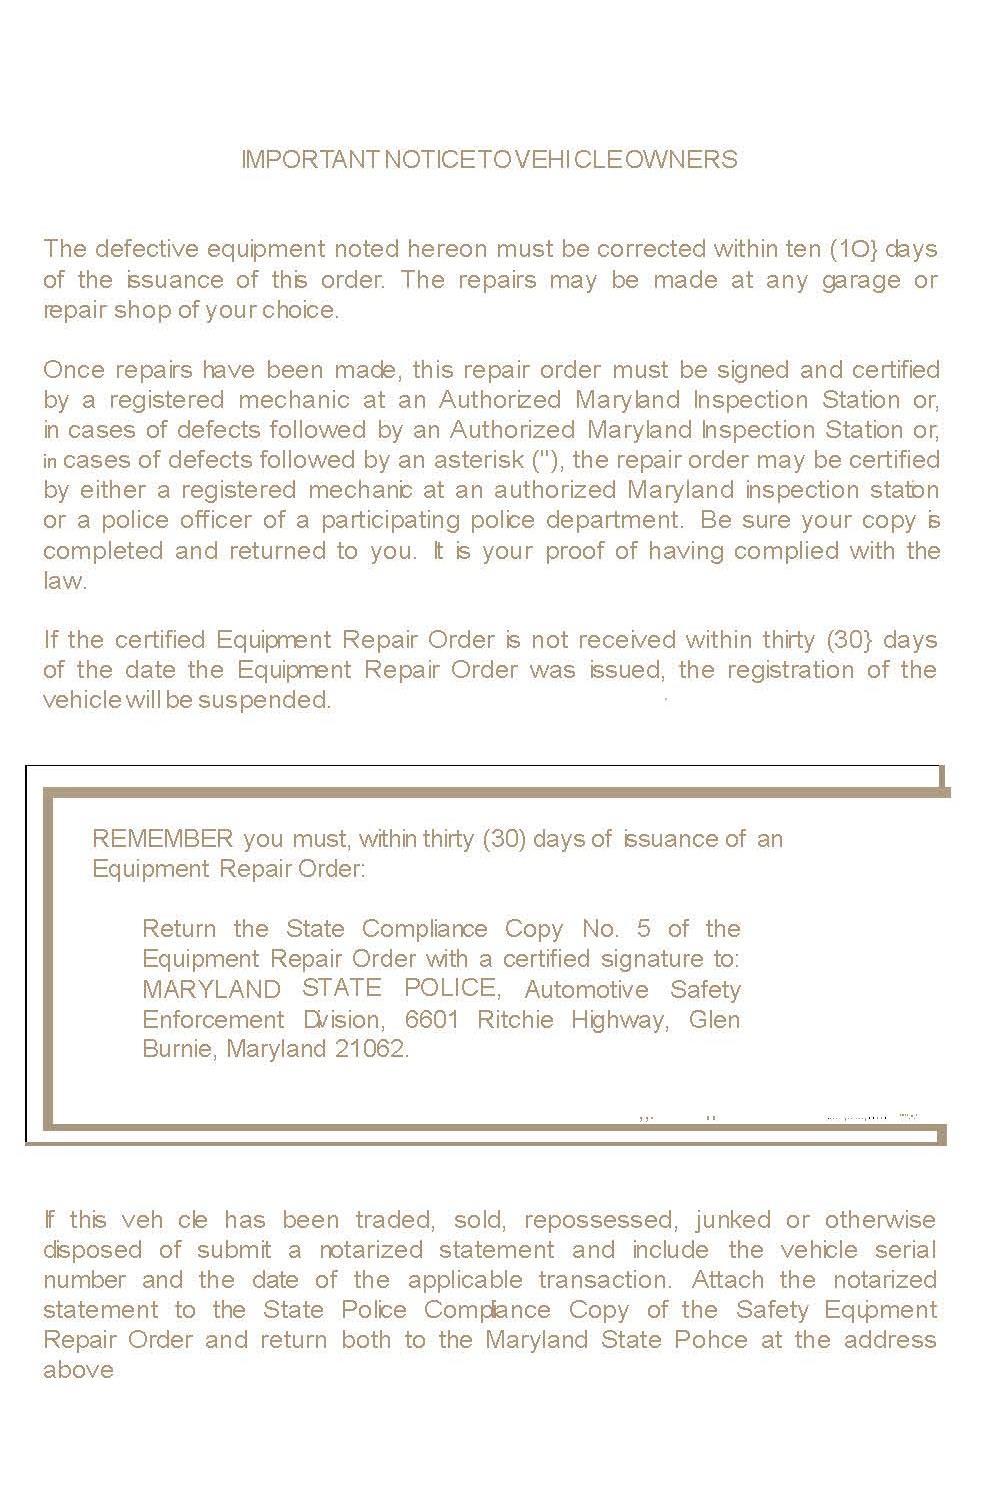 Policy 904 SAFETY EQUIPMENT REPAIR ORDER Page 5 of 5